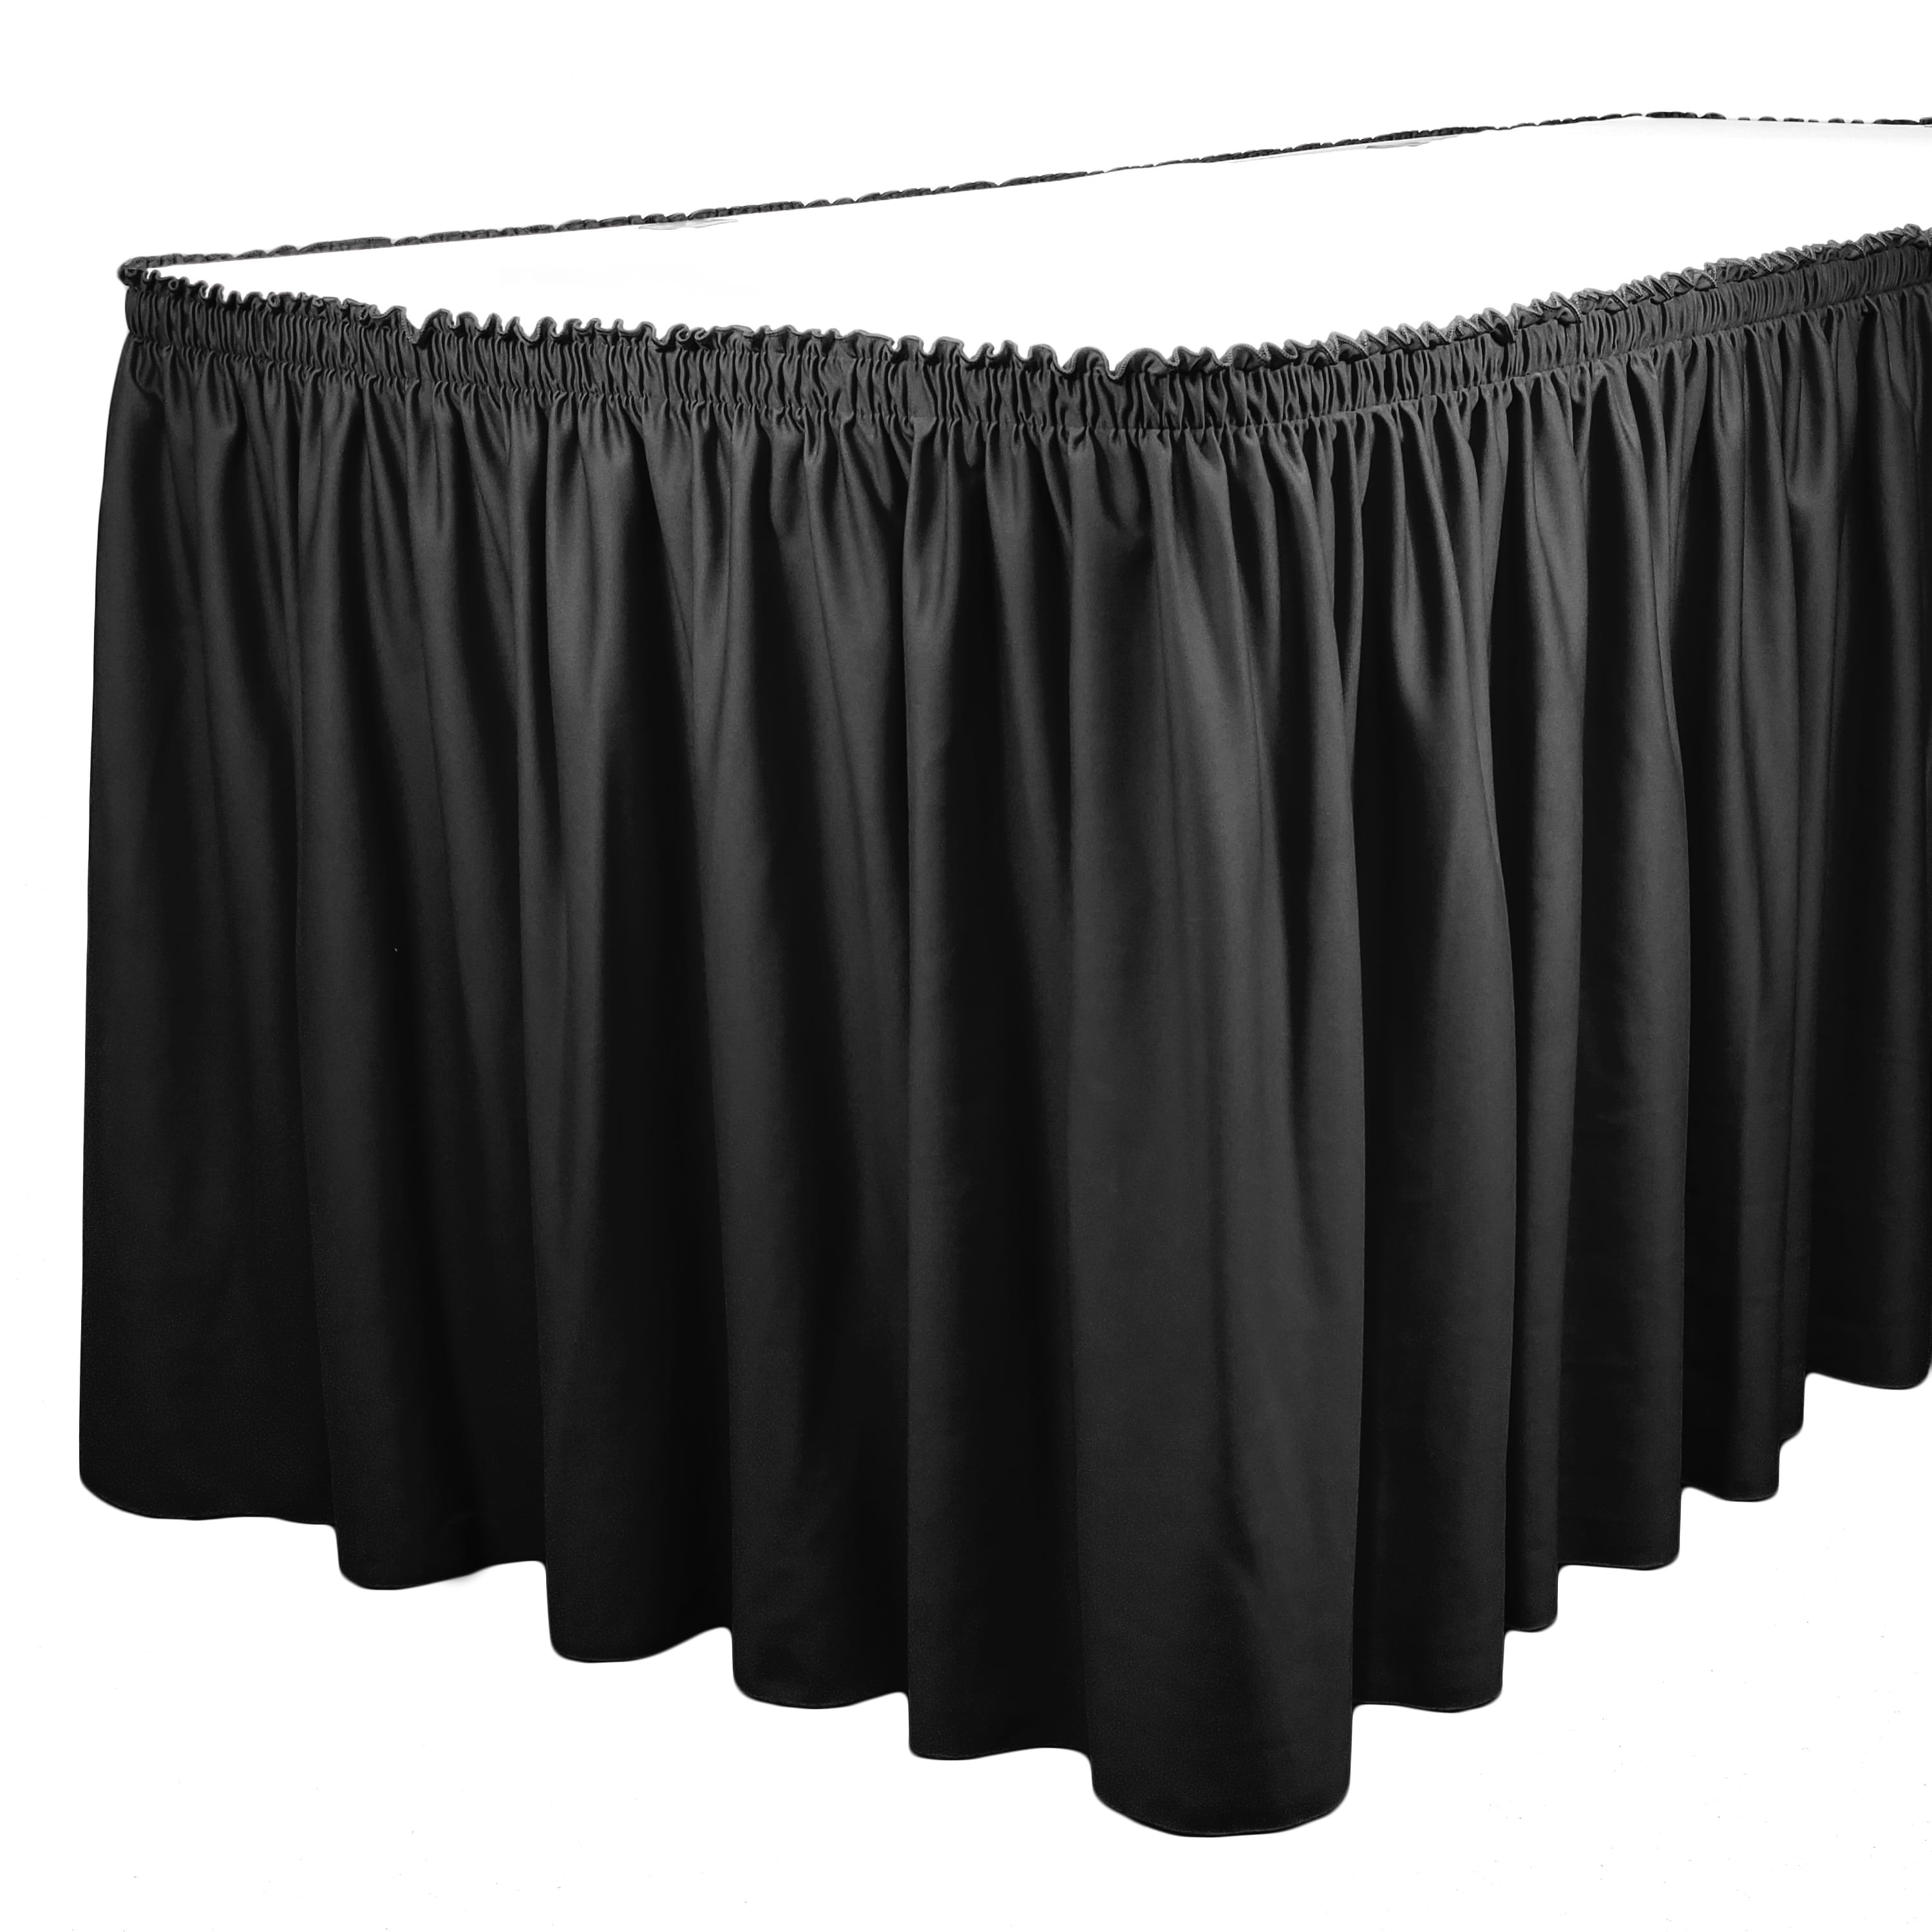 Shirred Pleat Table Skirting | Pleated Table Skirt